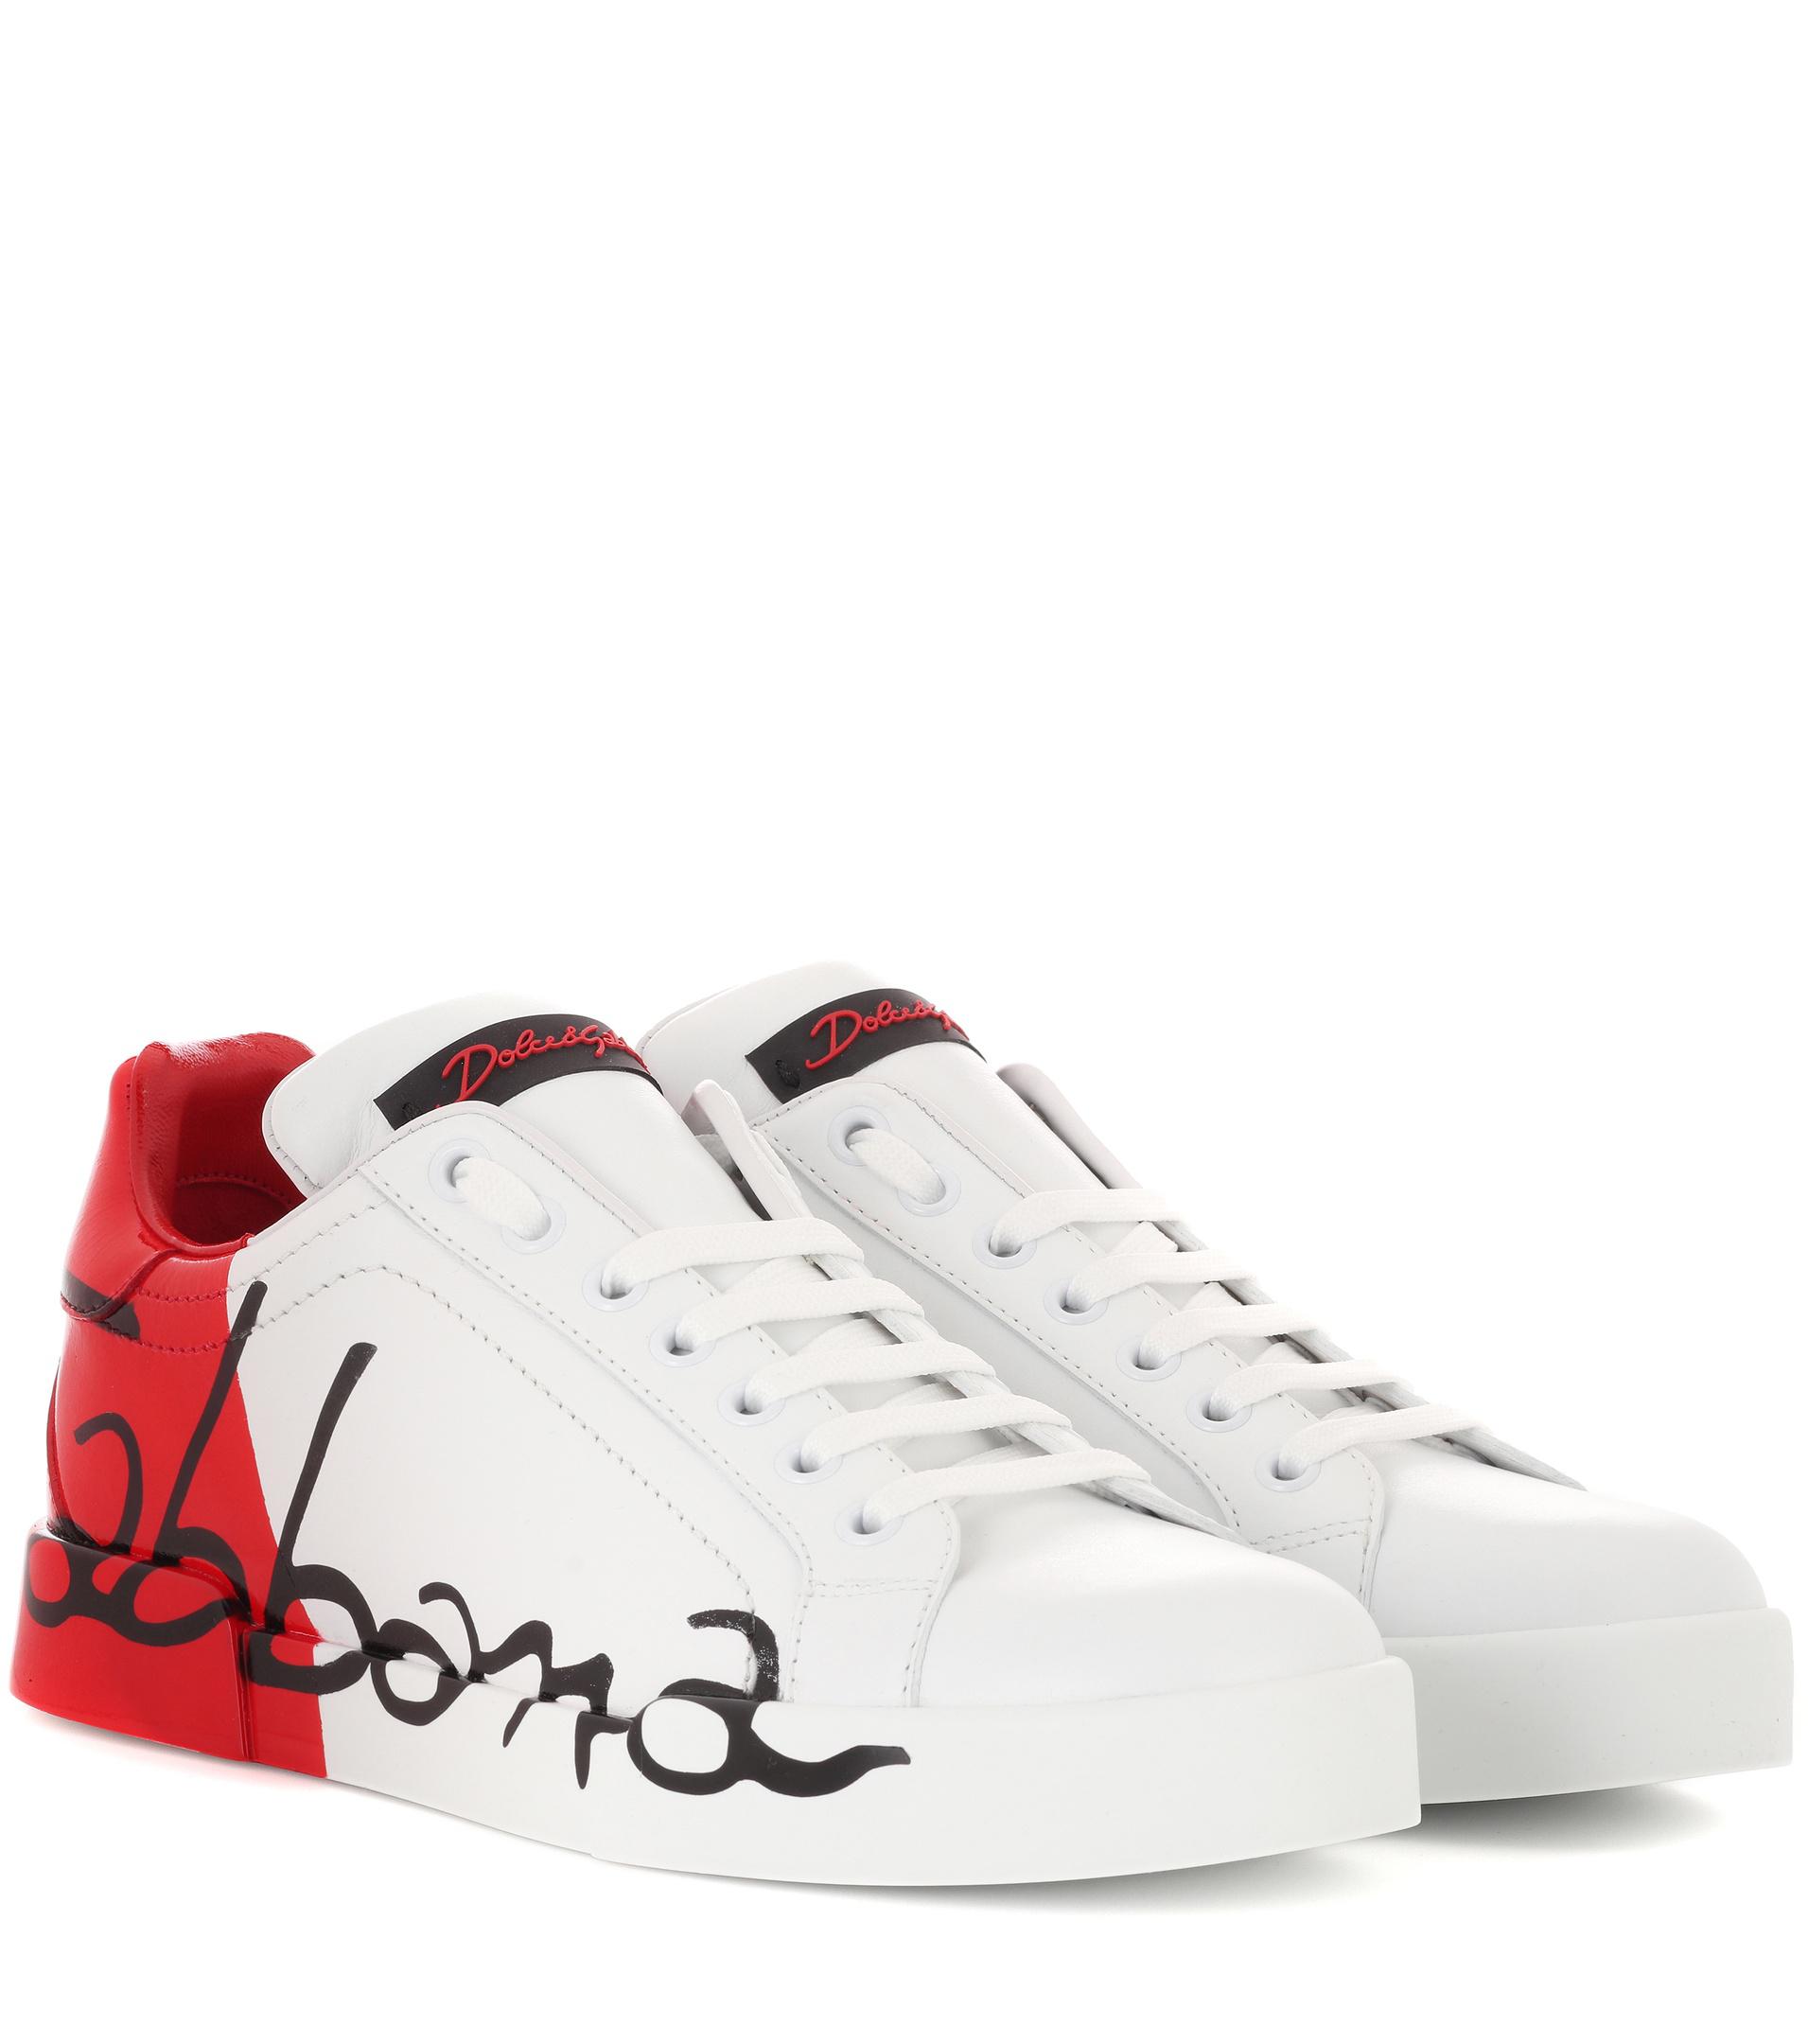 Dolce & Gabbana Printed Leather Sneakers in White - Lyst